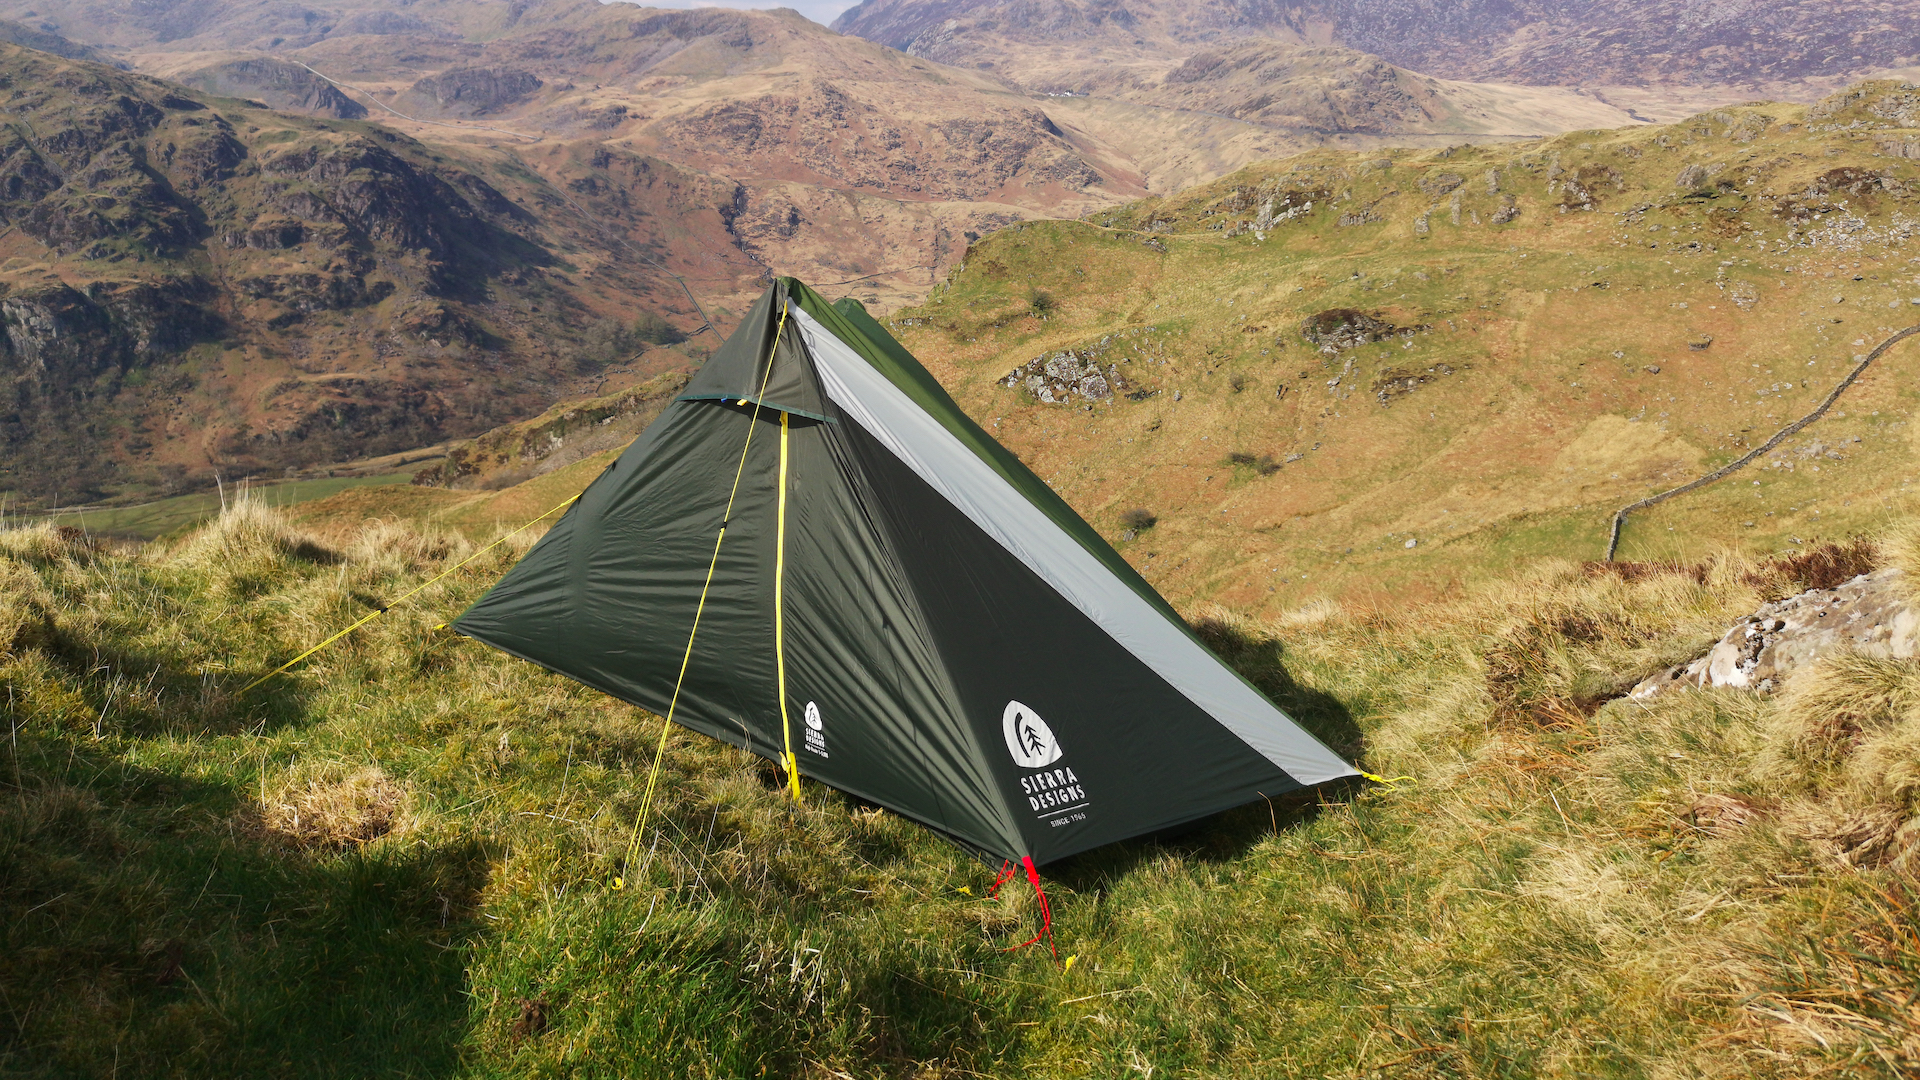 Sierra Designs High Route 3000 1P tent review